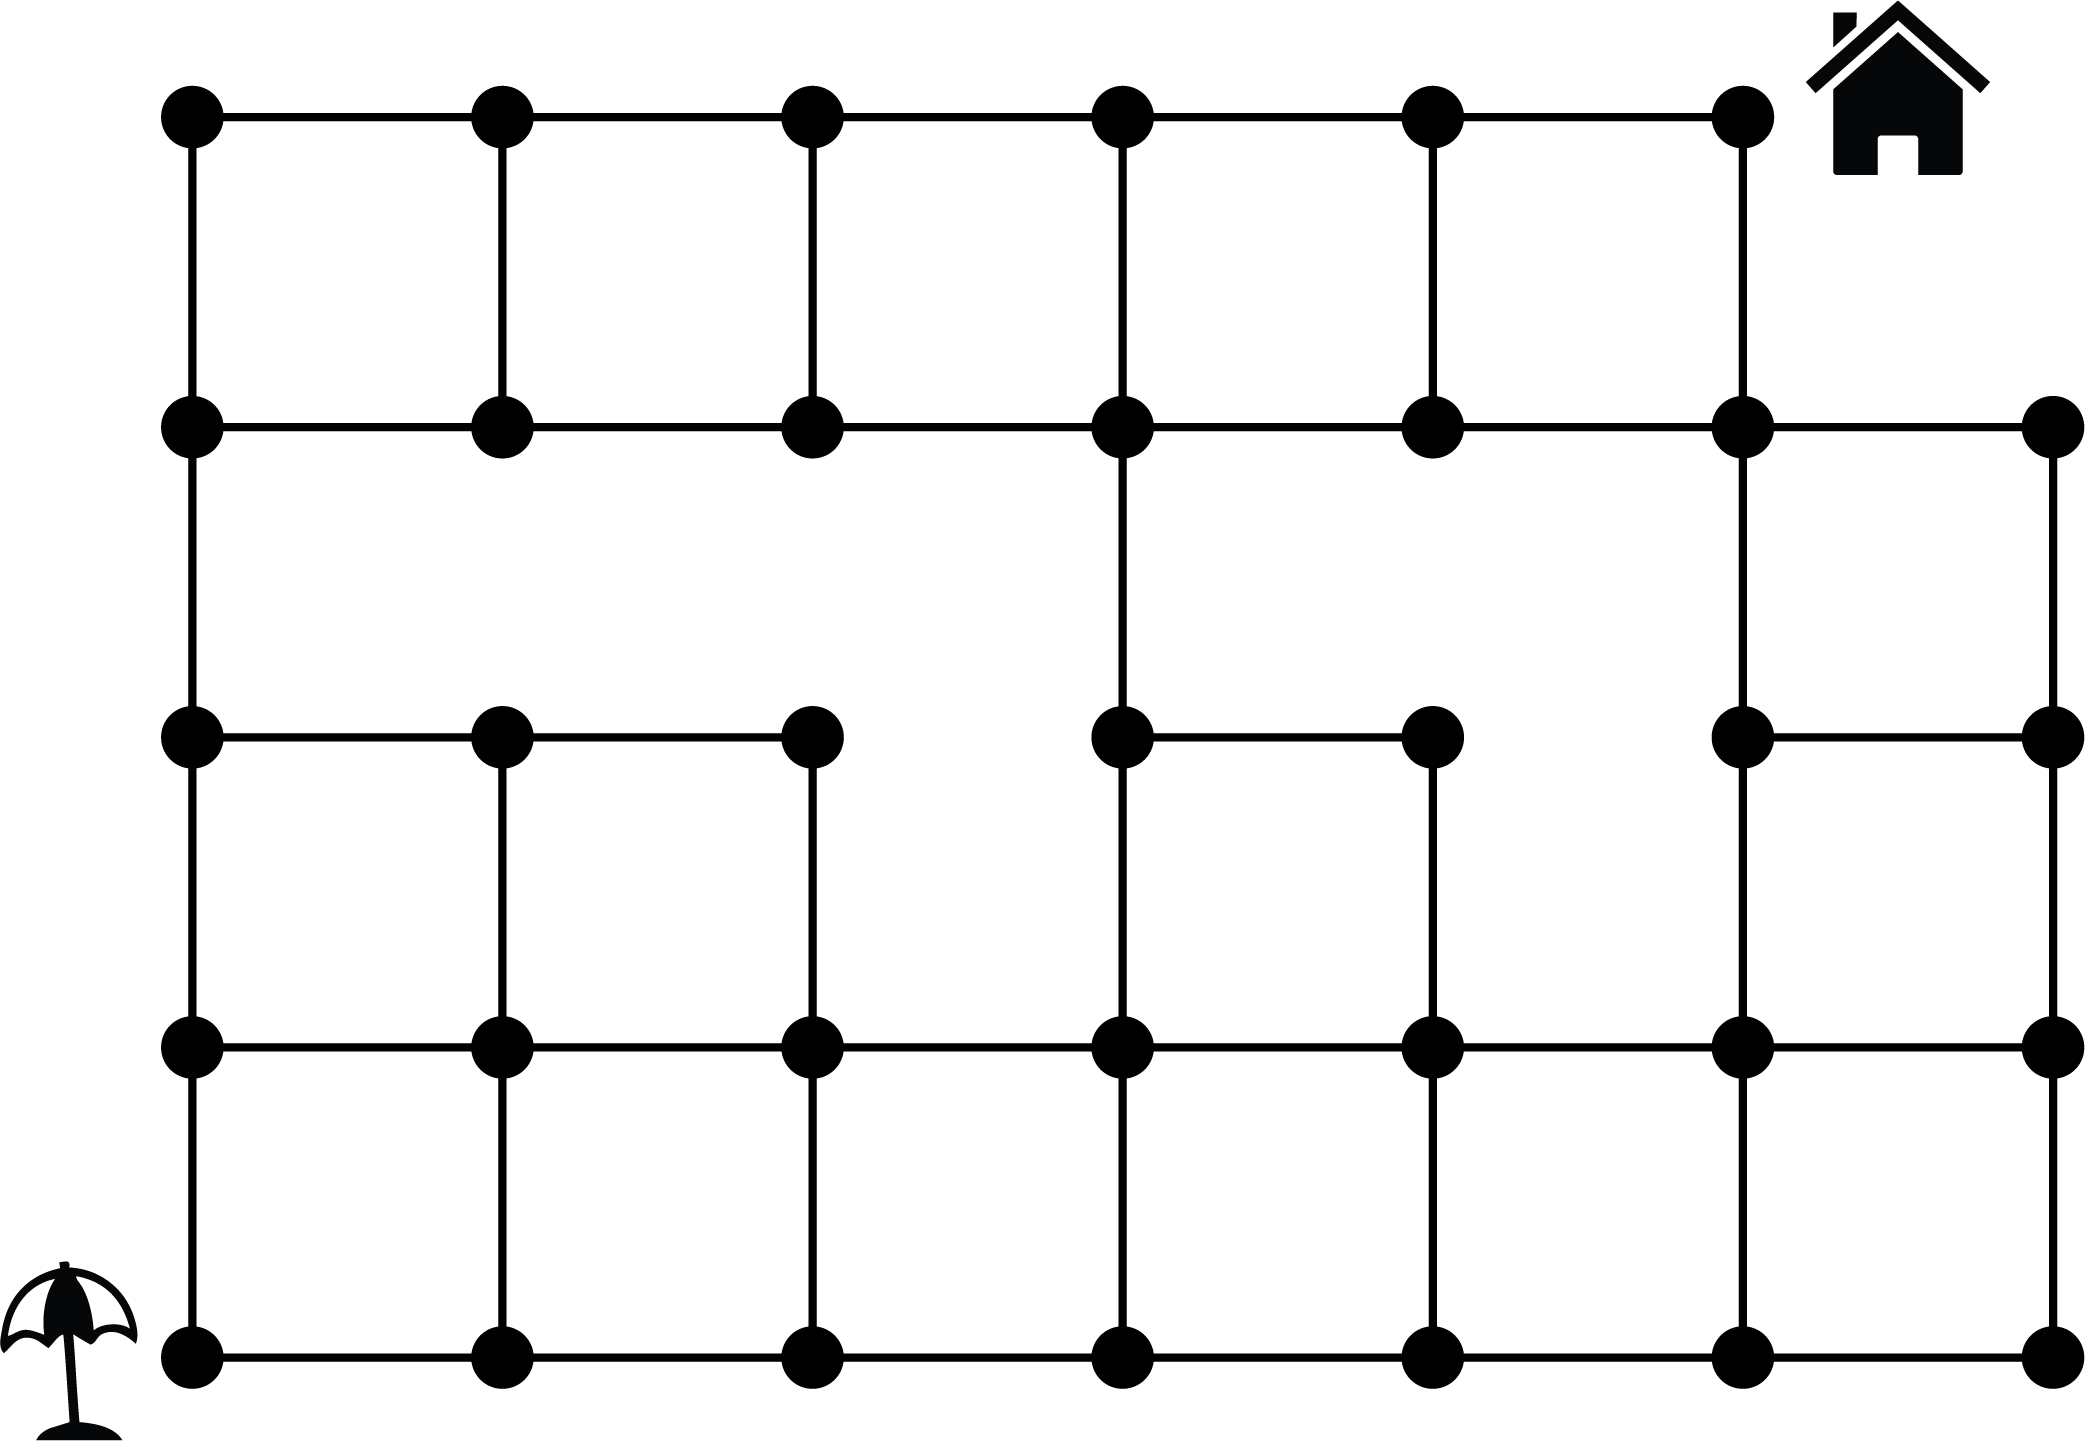 A rectangular grid of dots with line segments joining certain pairs of adjacent dots in the grid. A beach umbrella is placed at one corner of the grid and a house is placed at the opposite corner.